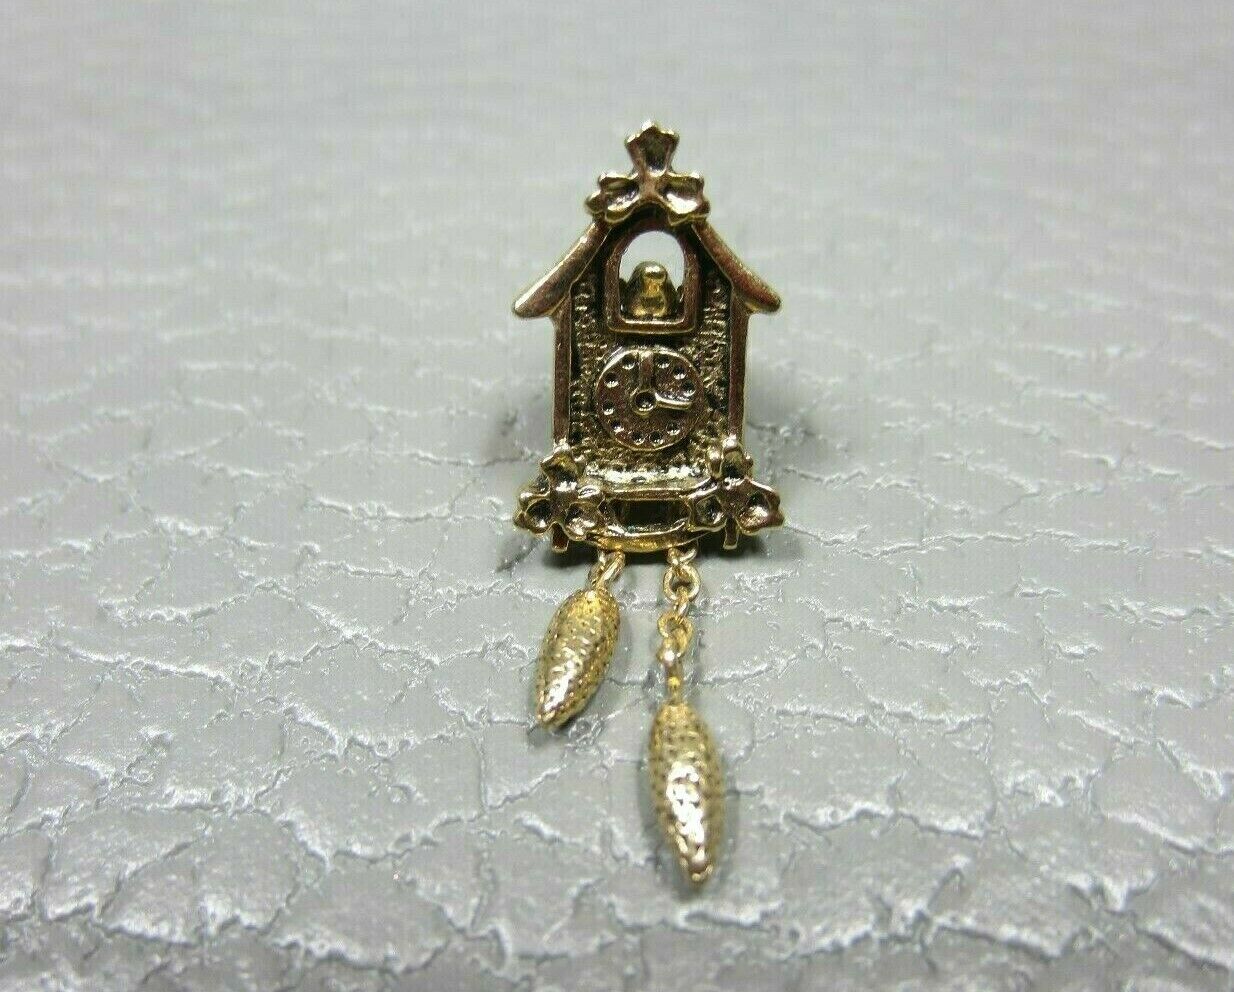 Vintage Figural Cuckoo Clock Yellow Gold Plated Tie Tac Or Lapel Pin